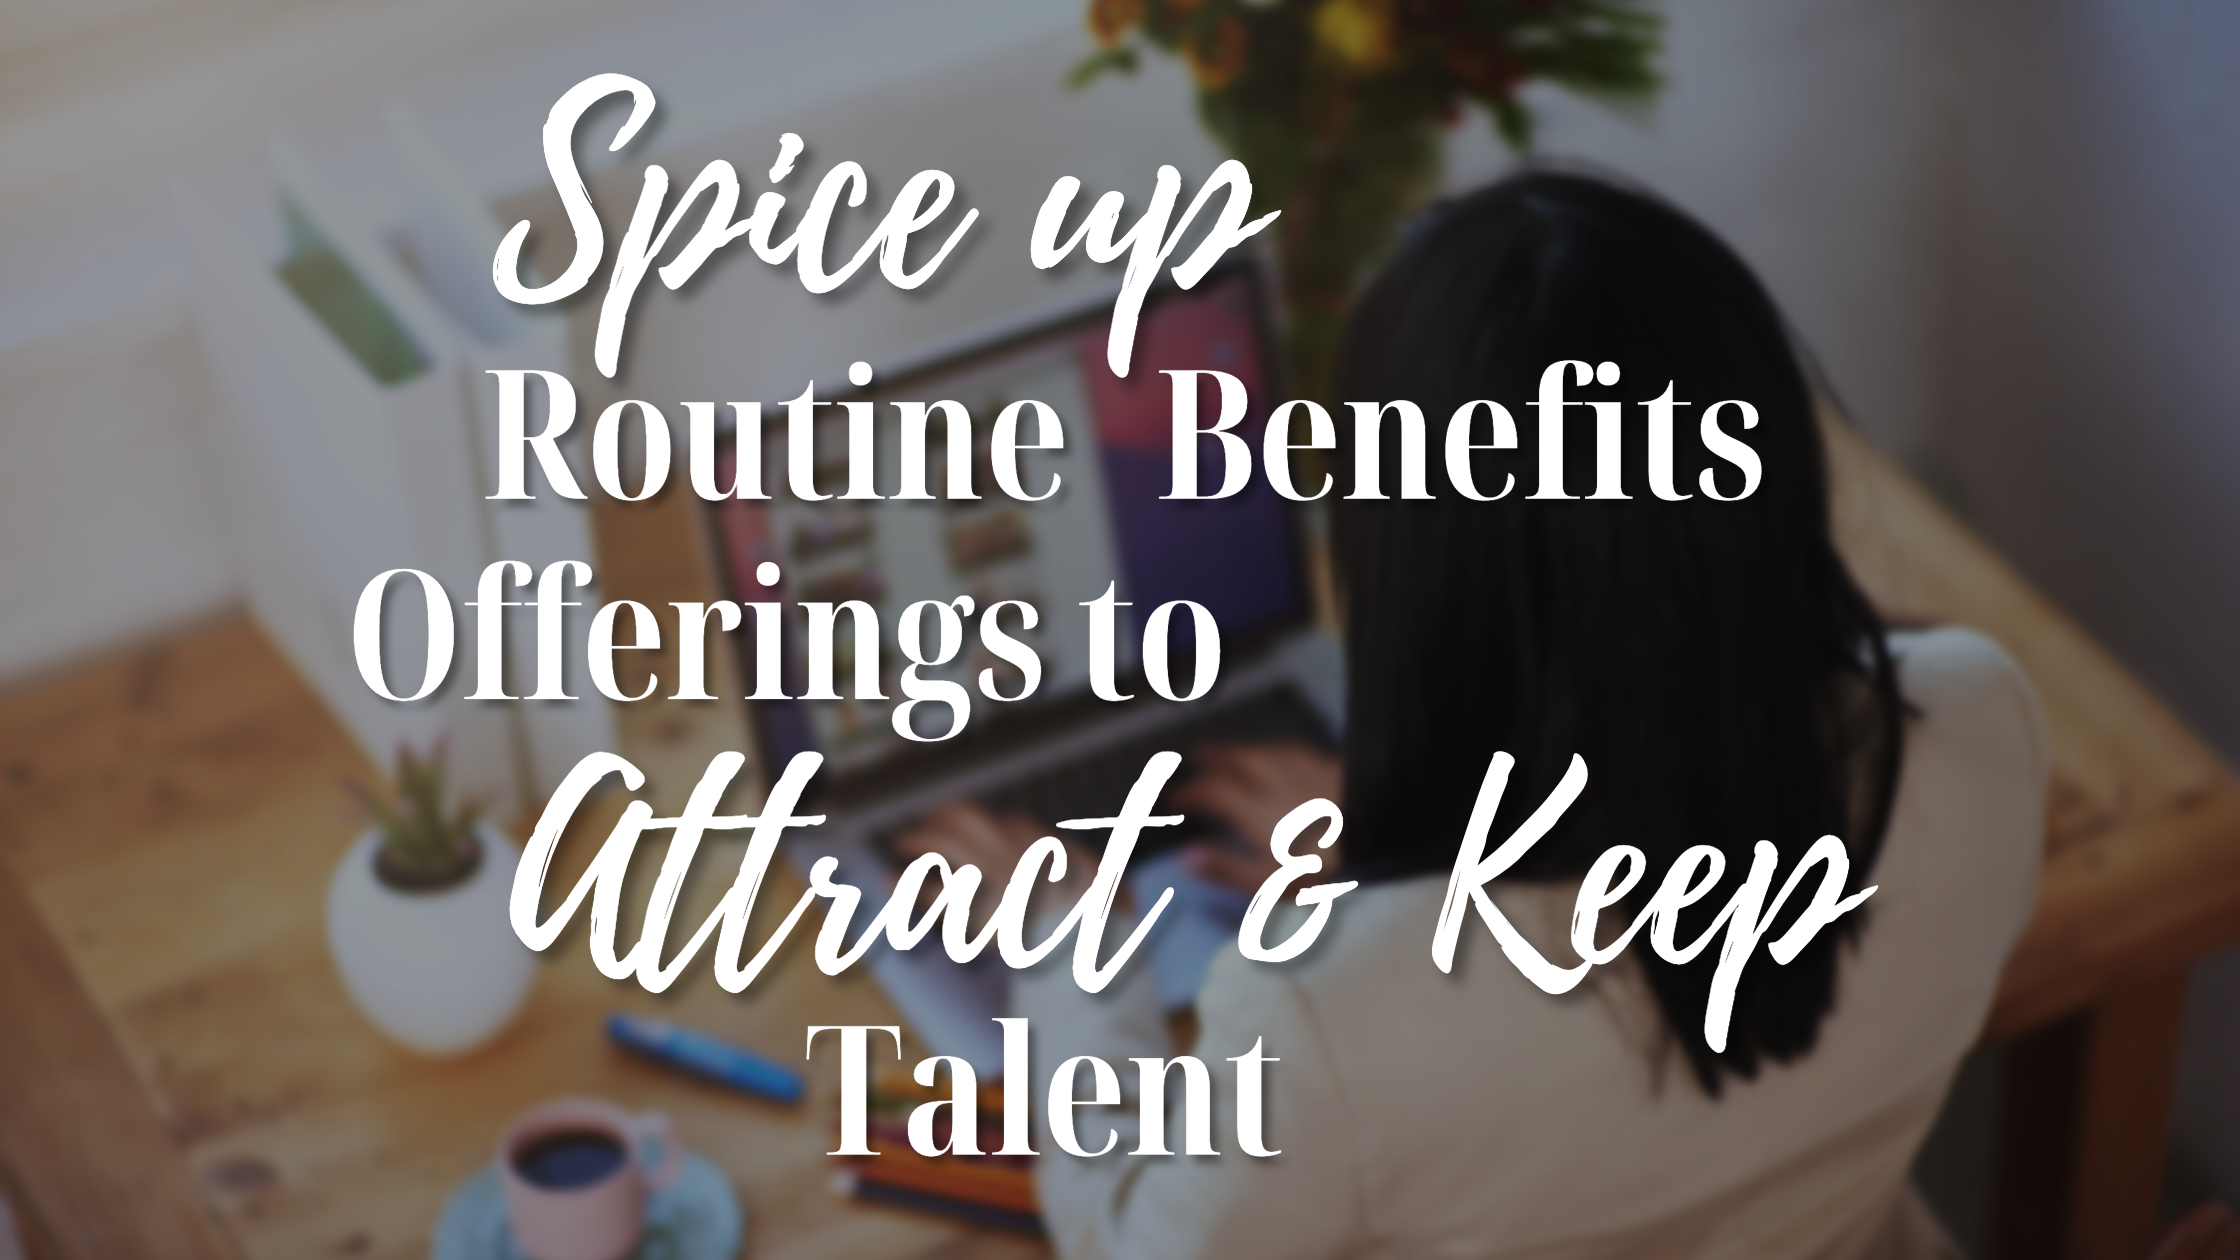 Spice Up Routine Benefits Offerings to Attract & Keep Talent